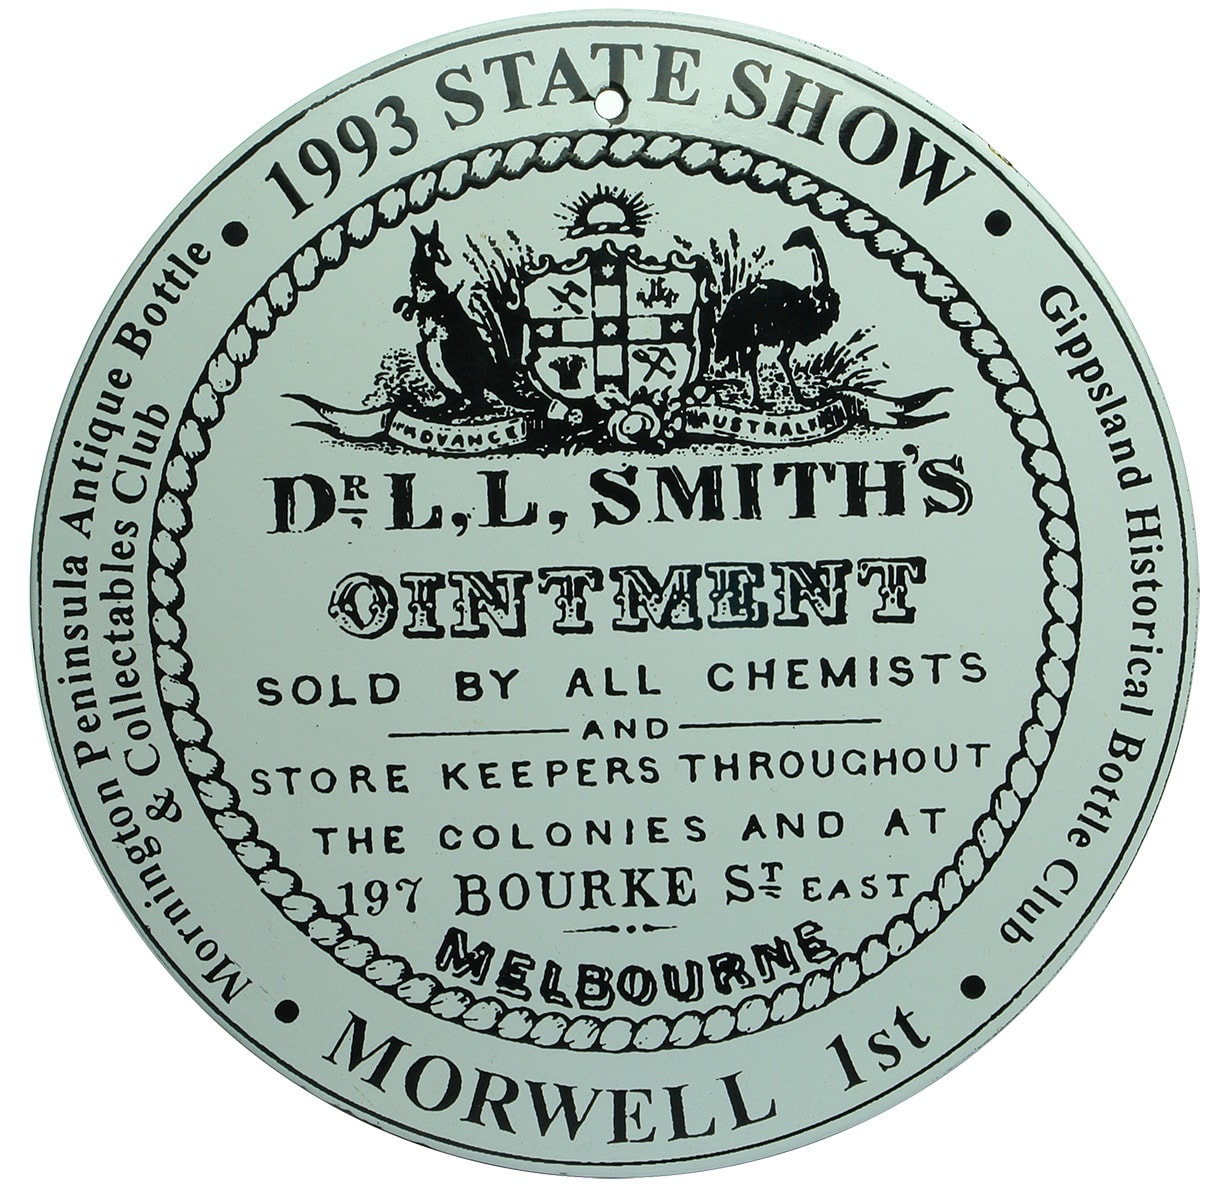 Smith's Ointment Morwell 1993 State Show Enamel Sign Prize